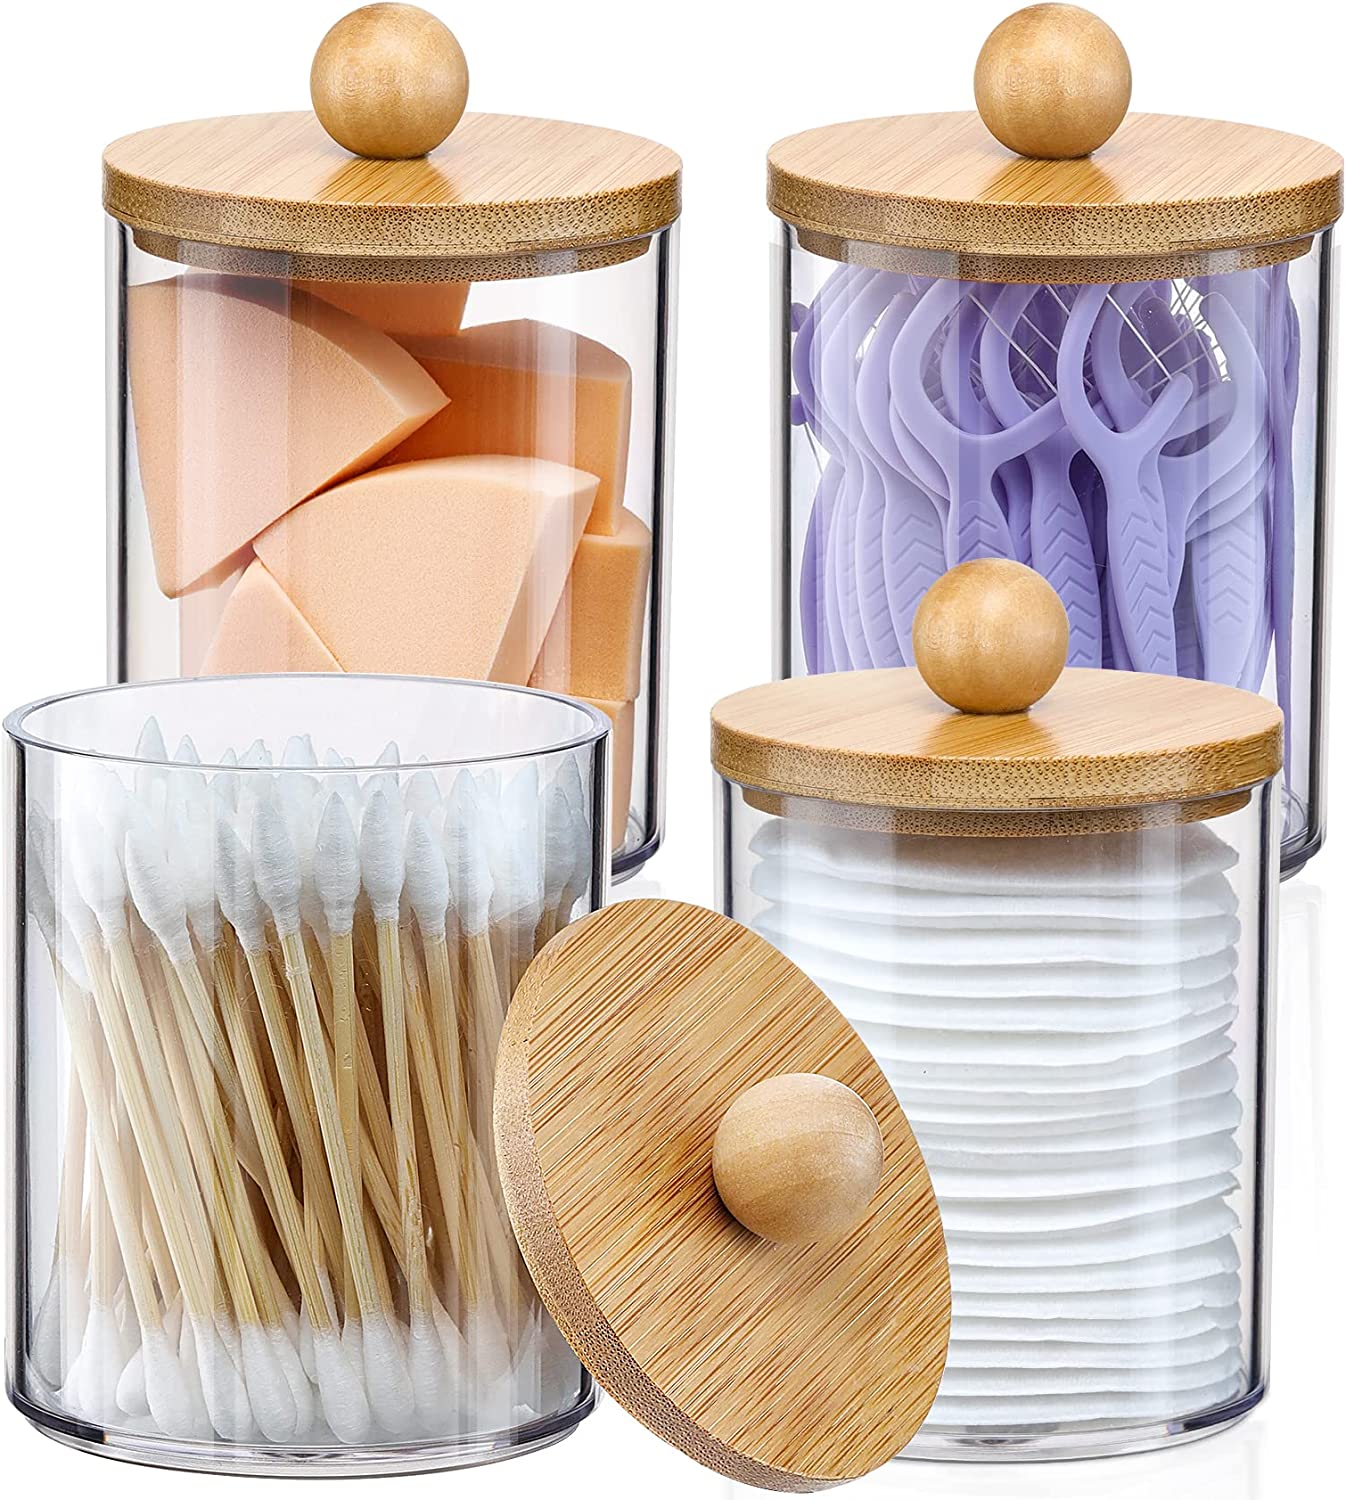 VITEVER 4 Pack Qtip Holder Dispenser with Bamboo Lids - Clear Plastic Apothecary Jar Containers for Vanity Makeup Organizer - Bathroom Accessories Set for Cotton Swabs, Balls, Pads, Floss